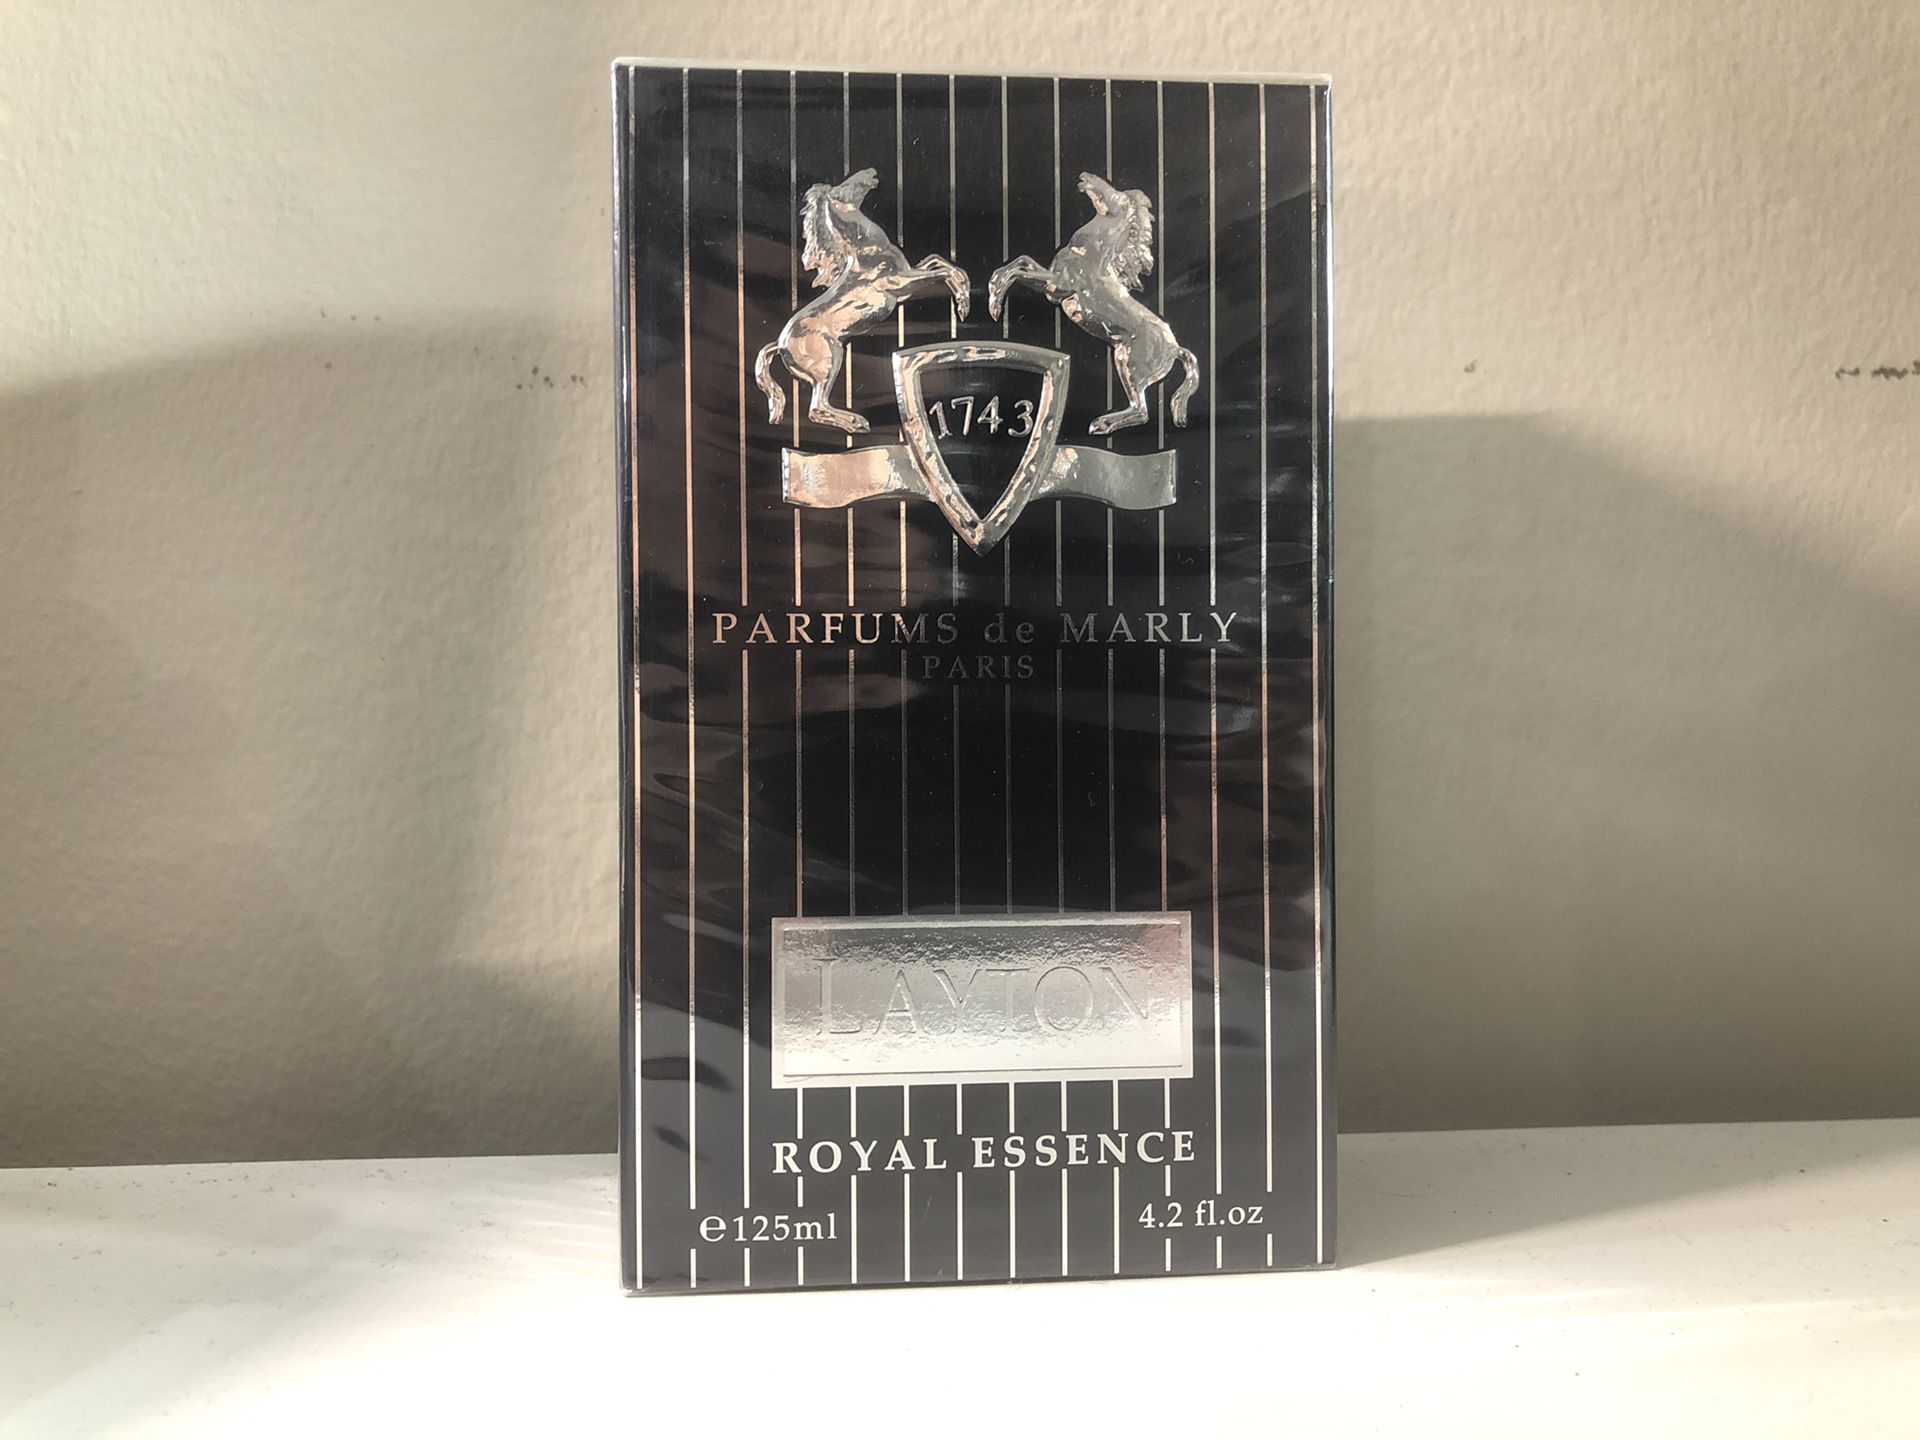 Parfums de Marly Layton (brand new in box sealed) 125ml 4.2oz